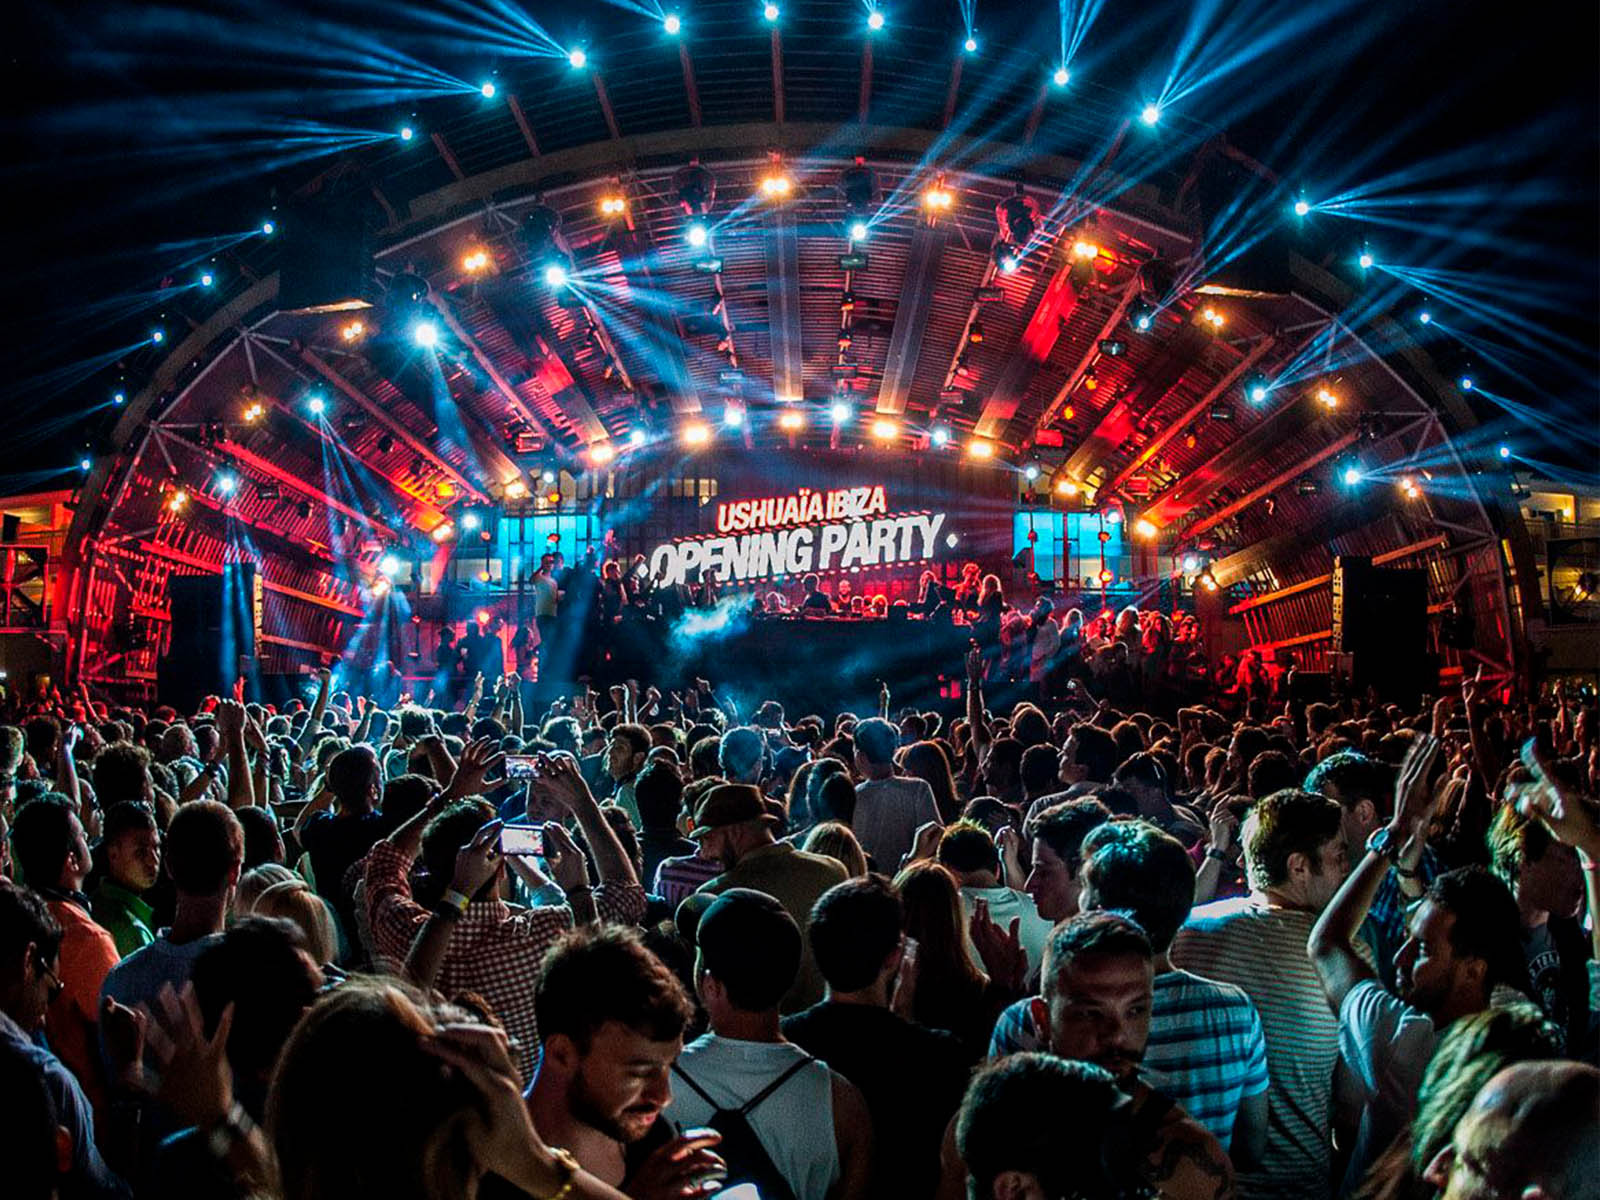 Ushuaïa and Hï Ibiza nominated for World’s Best Clubs 2022